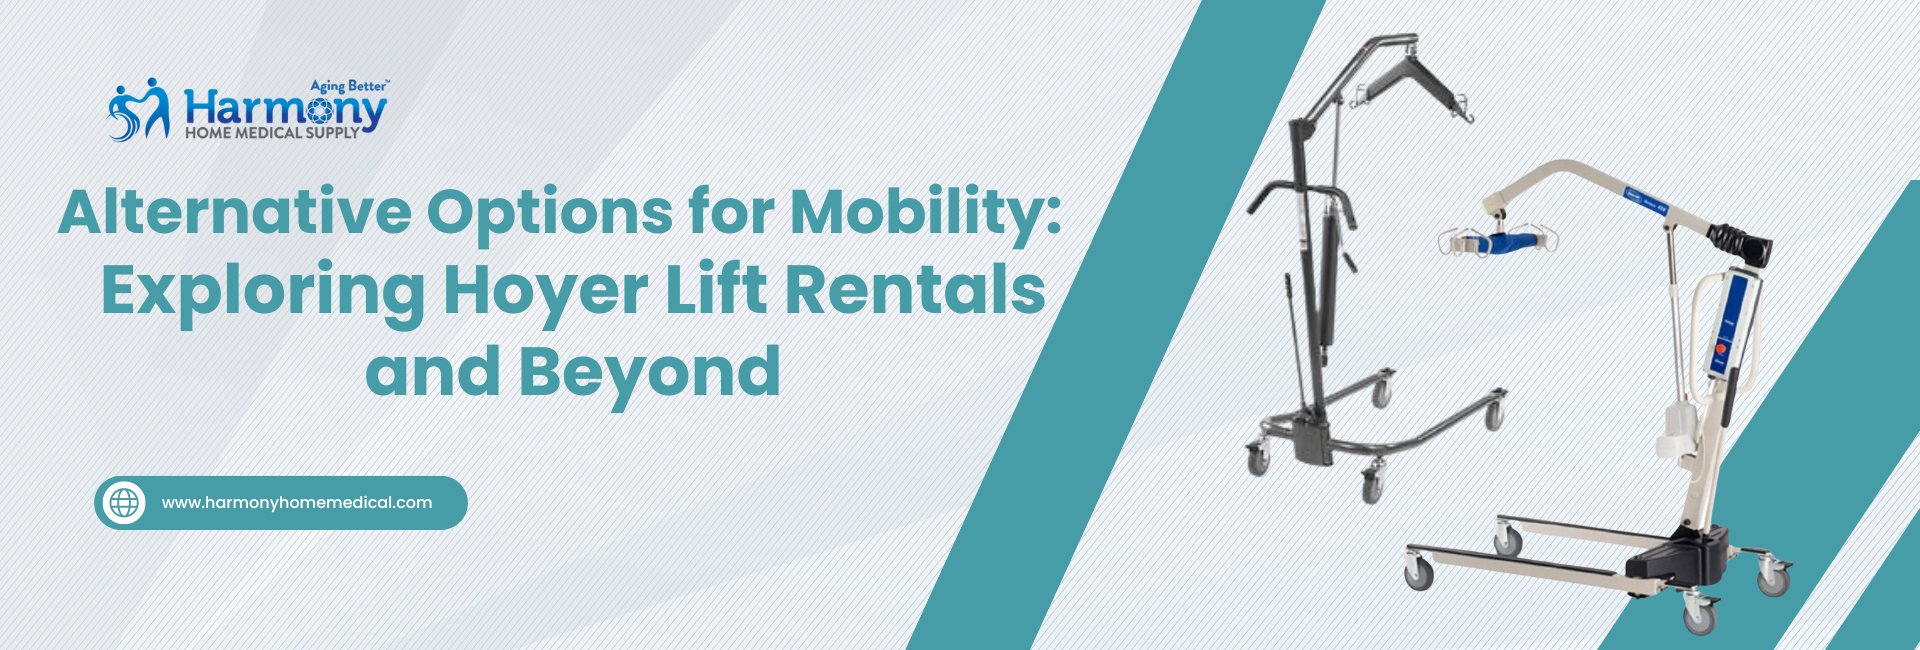 Alternative Options for Mobility: Exploring Hoyer Lift Rentals and Beyond